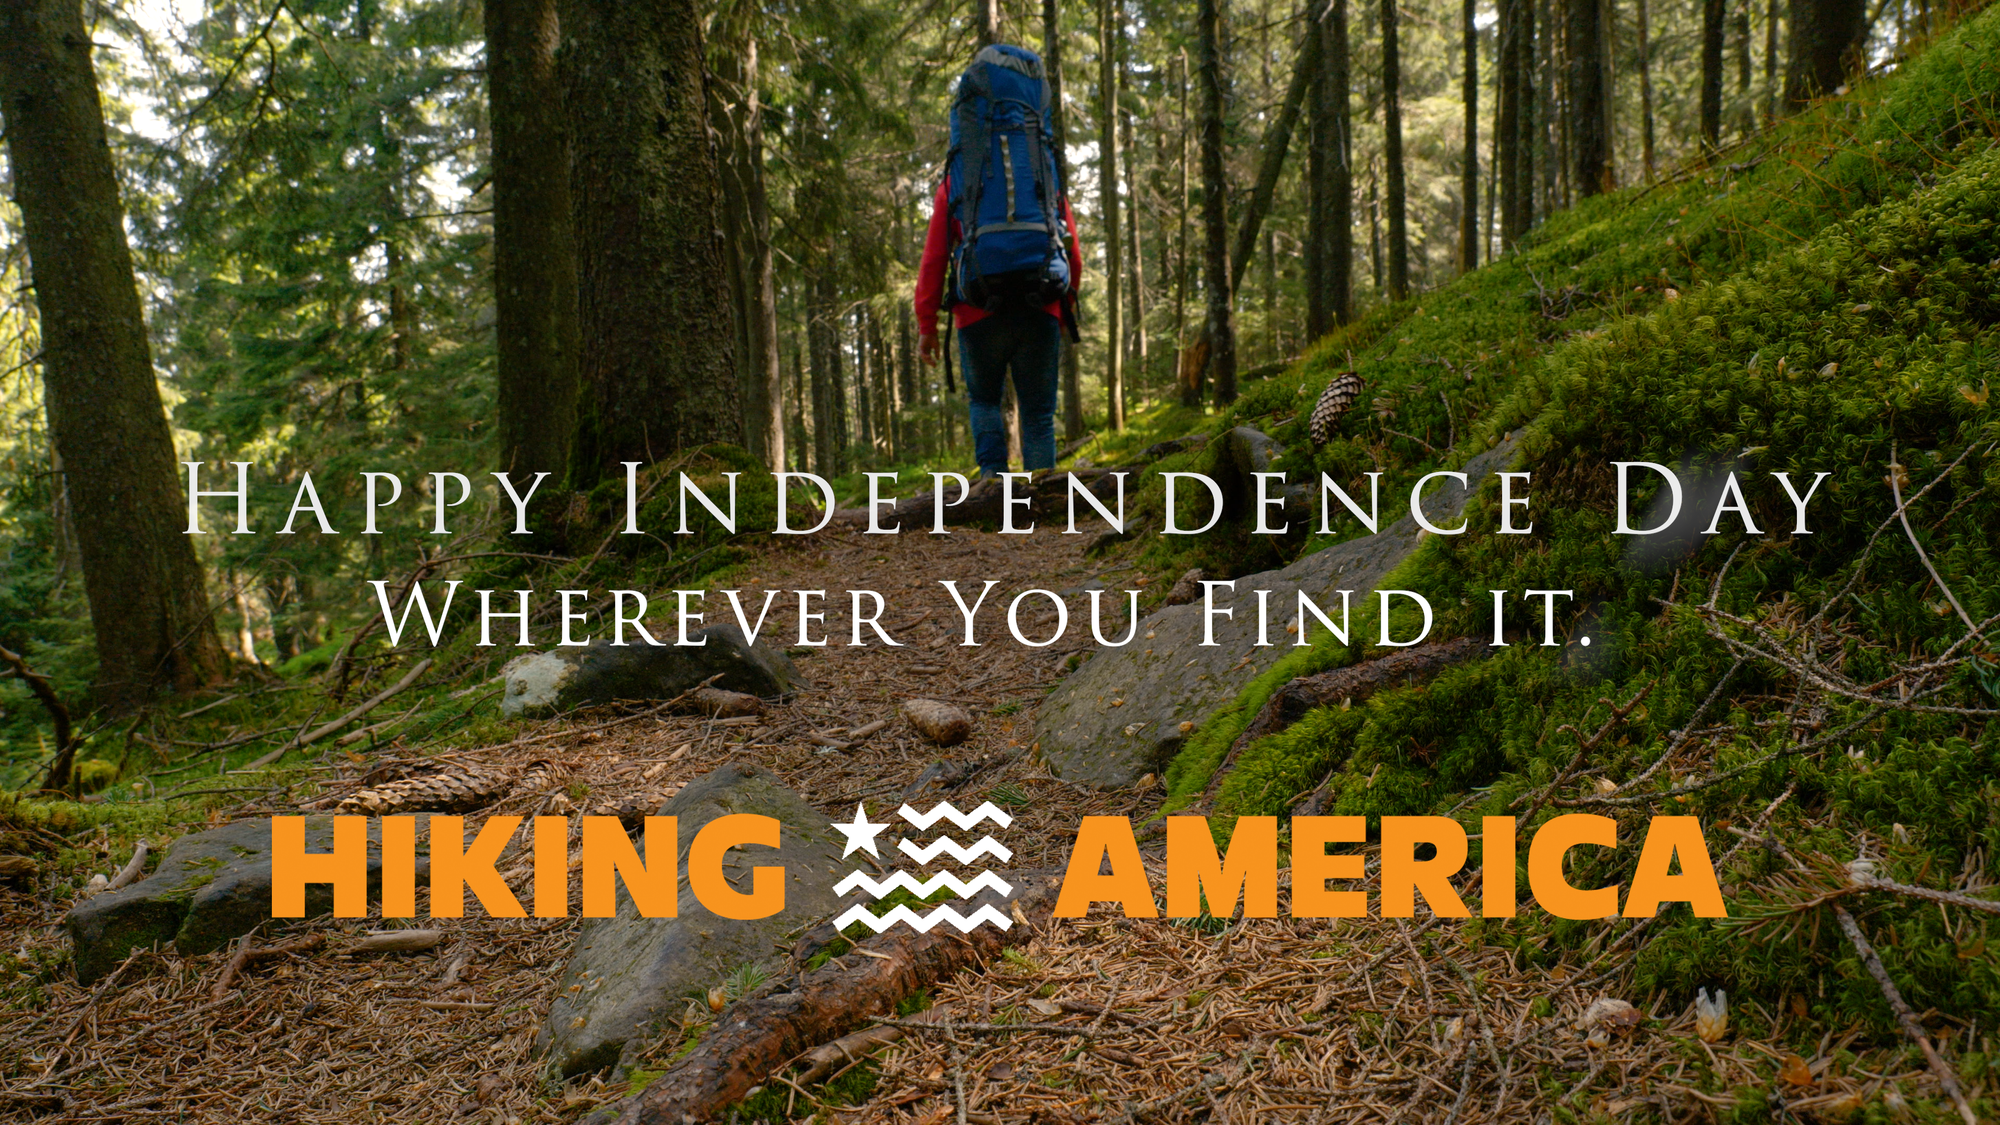 The ADT Guide is now "Hiking America!"